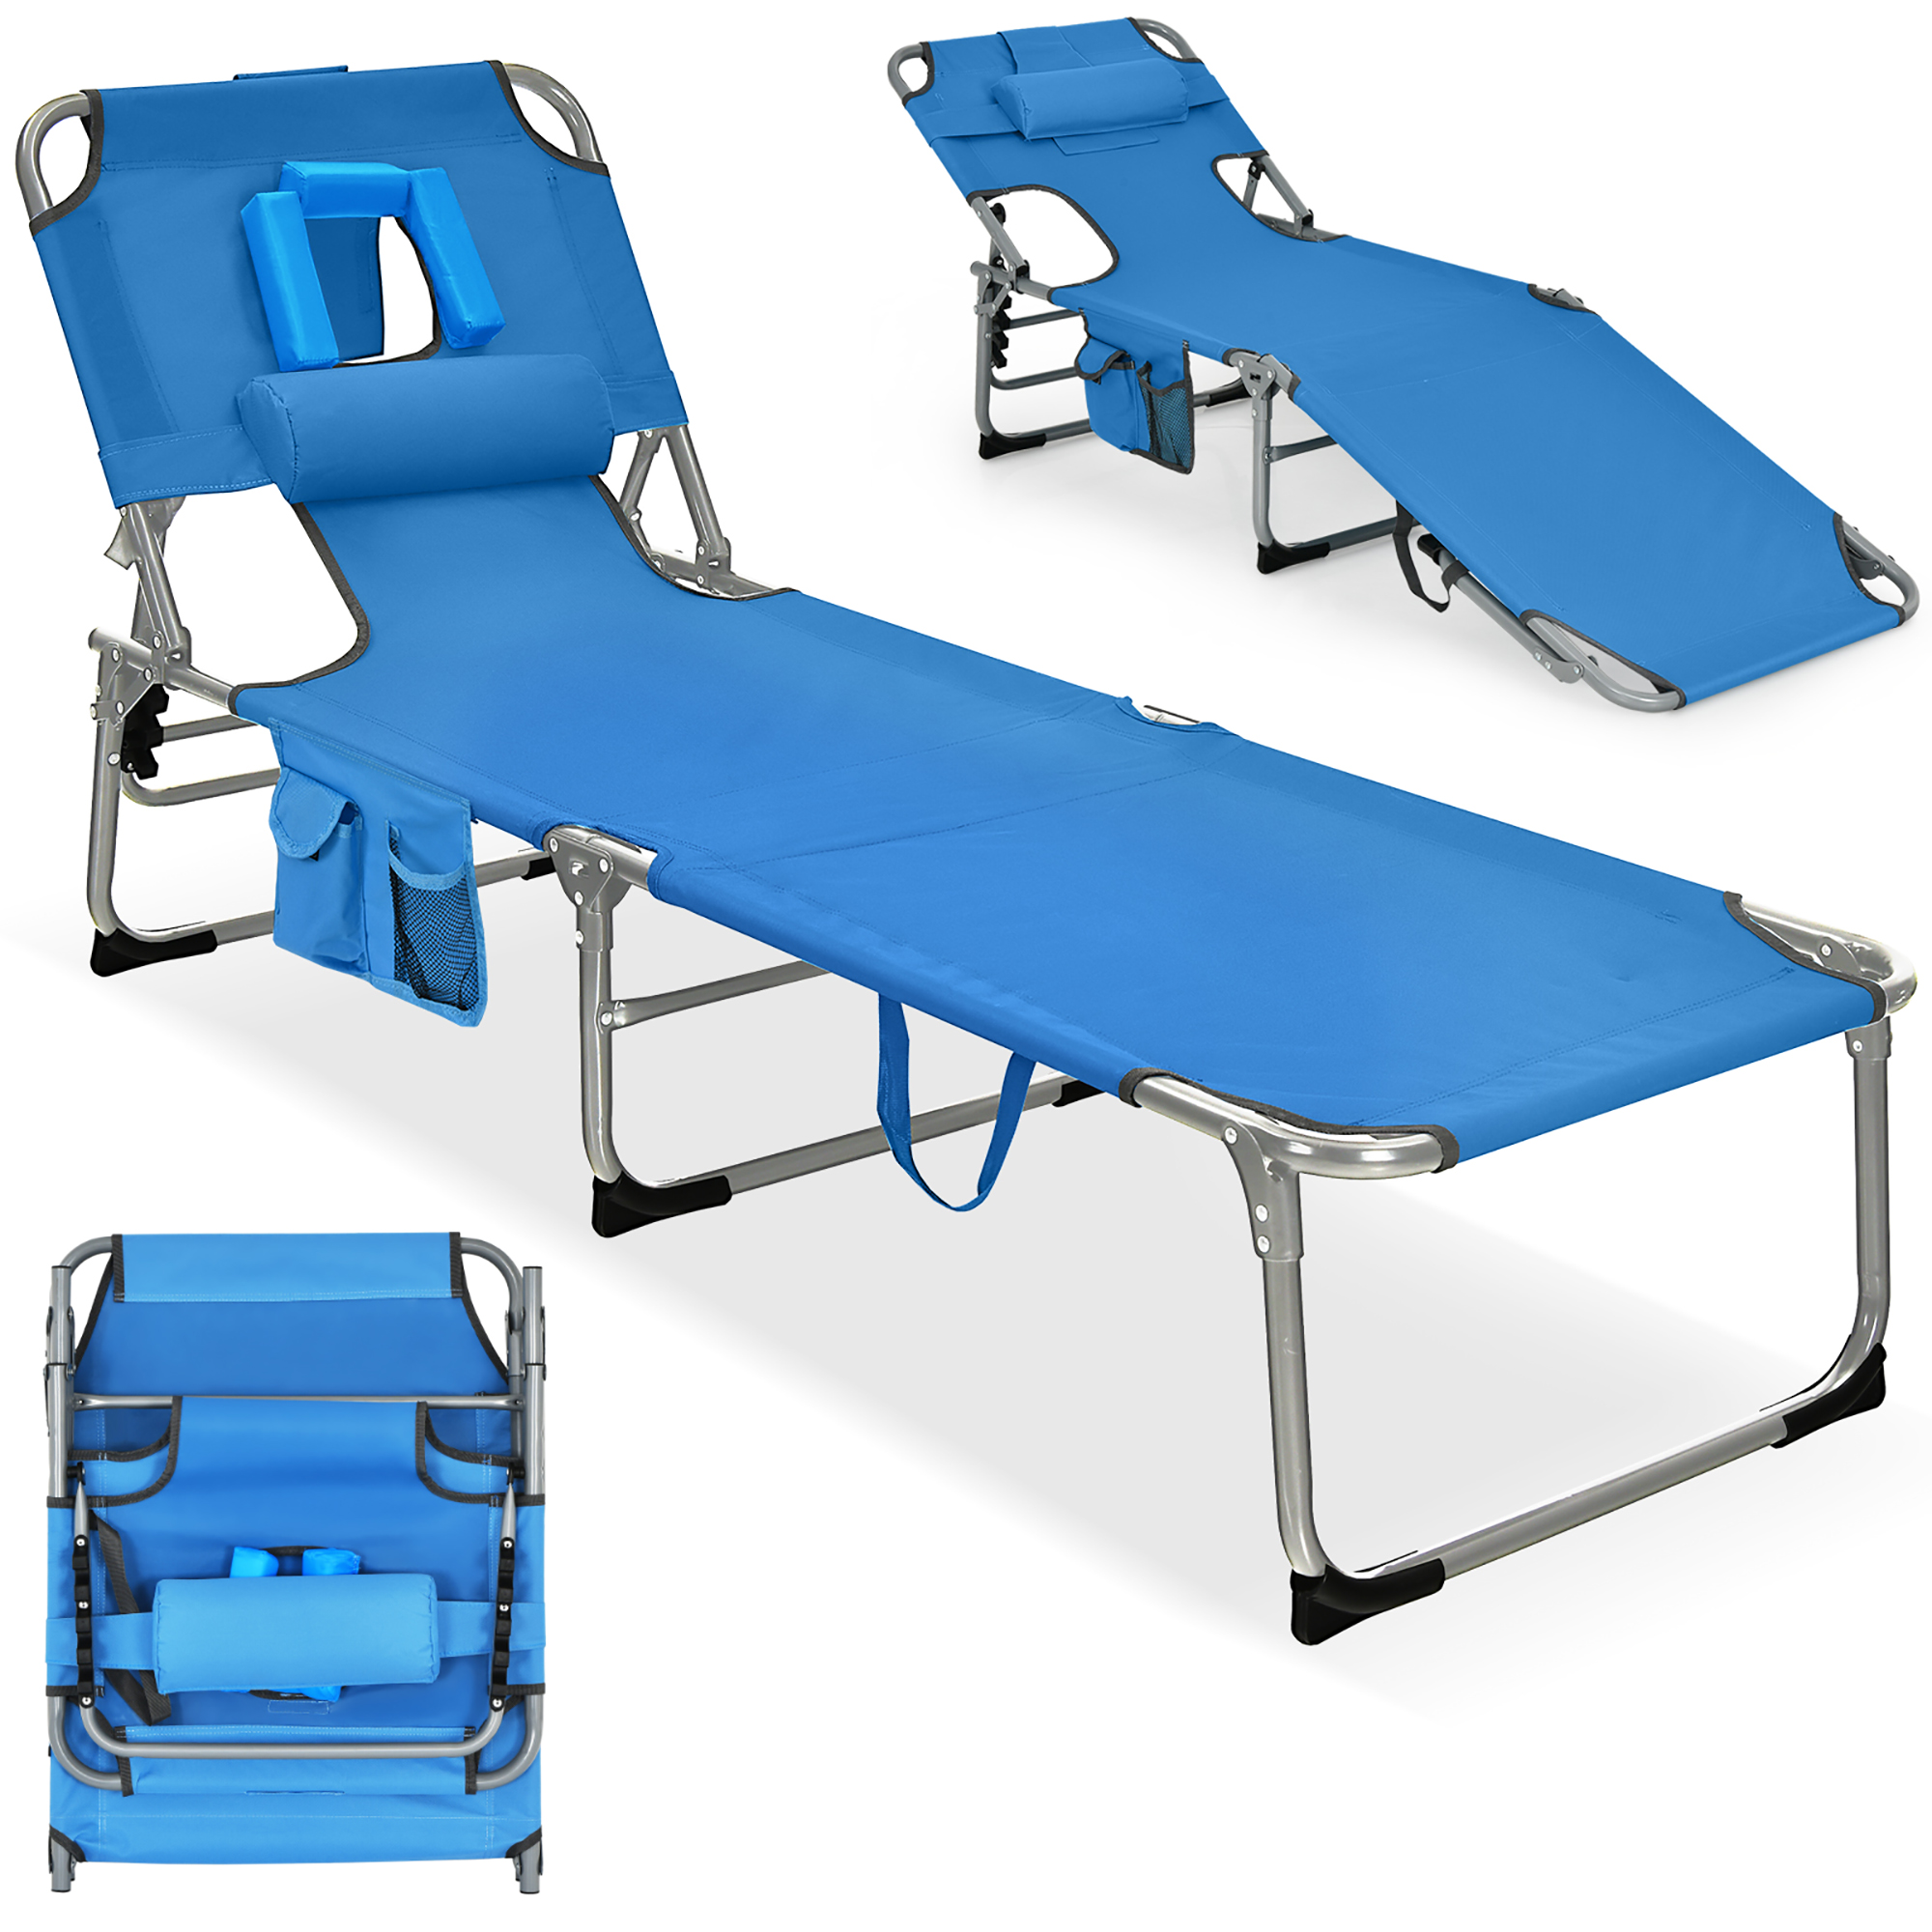 Gymax Folding Chaise Lounge Chair Bed Adjustable Outdoor Patio Beach Camping Recliner Blue - image 1 of 8